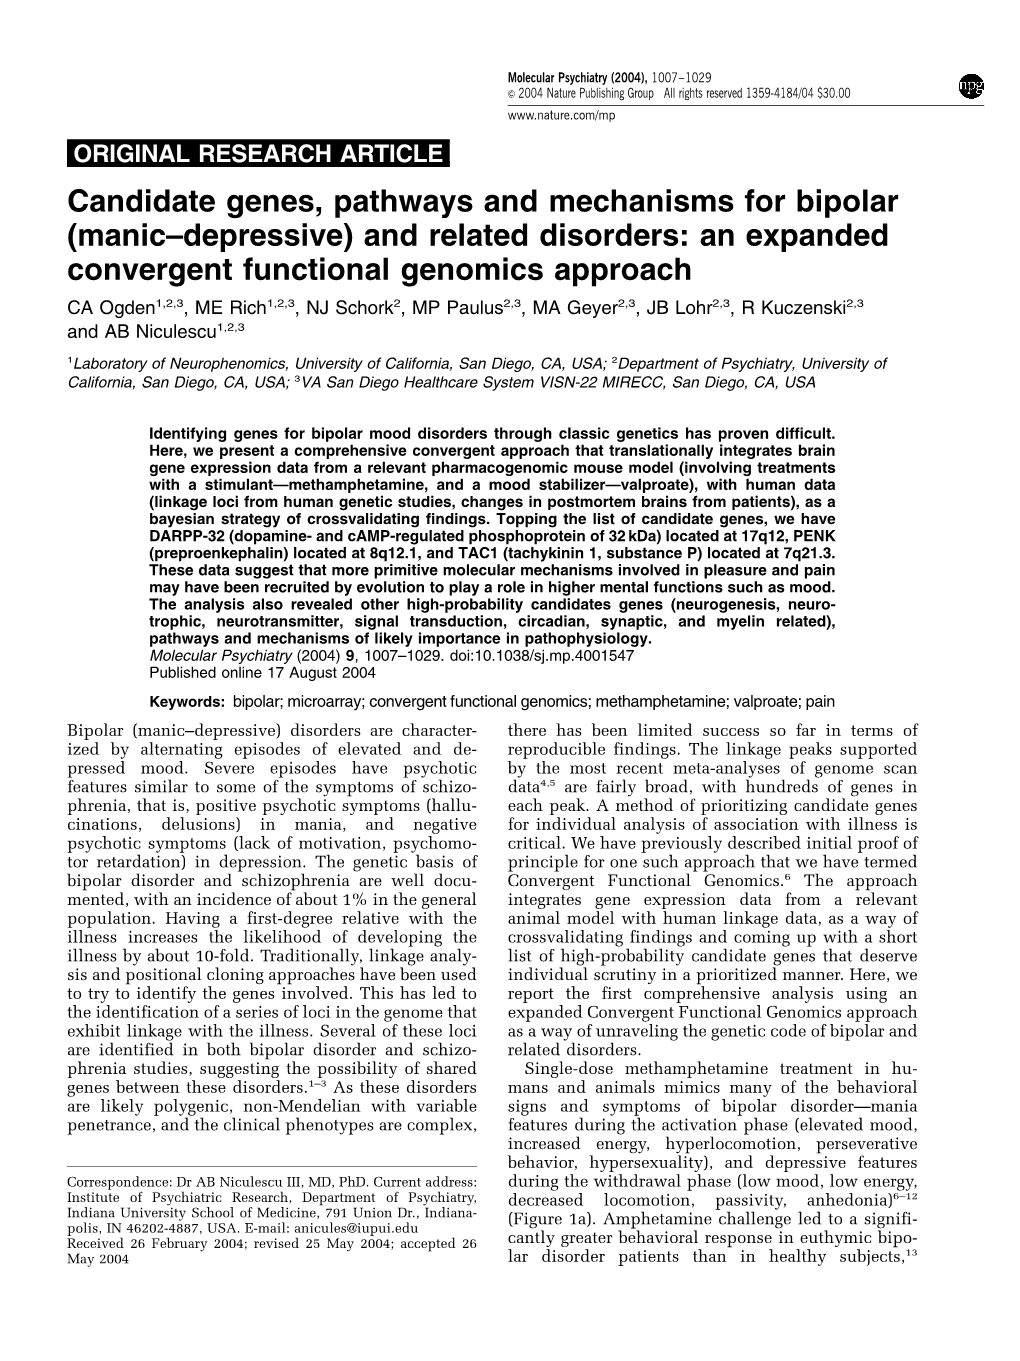 Candidate Genes, Pathways and Mechanisms for Bipolar (Manic–Depressive) and Related Disorders: an Expanded Convergent Function